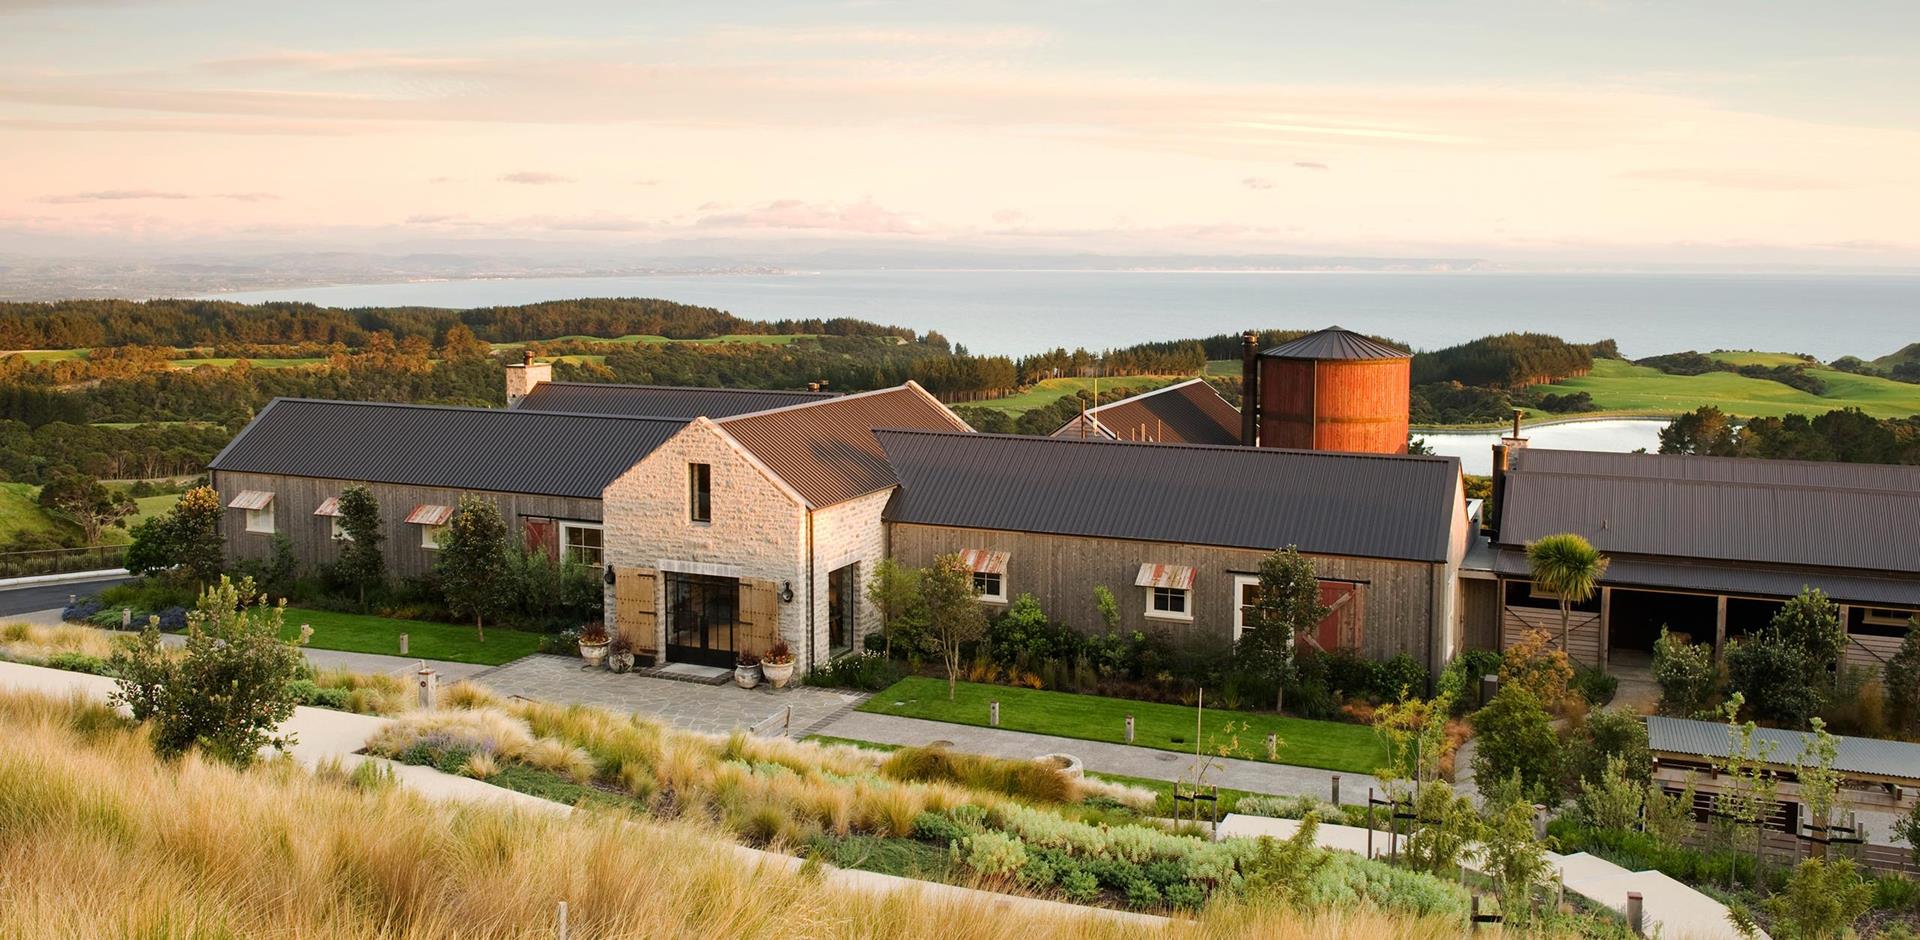 Exterior, Rosewood Cape Kidnappers, New Zealand